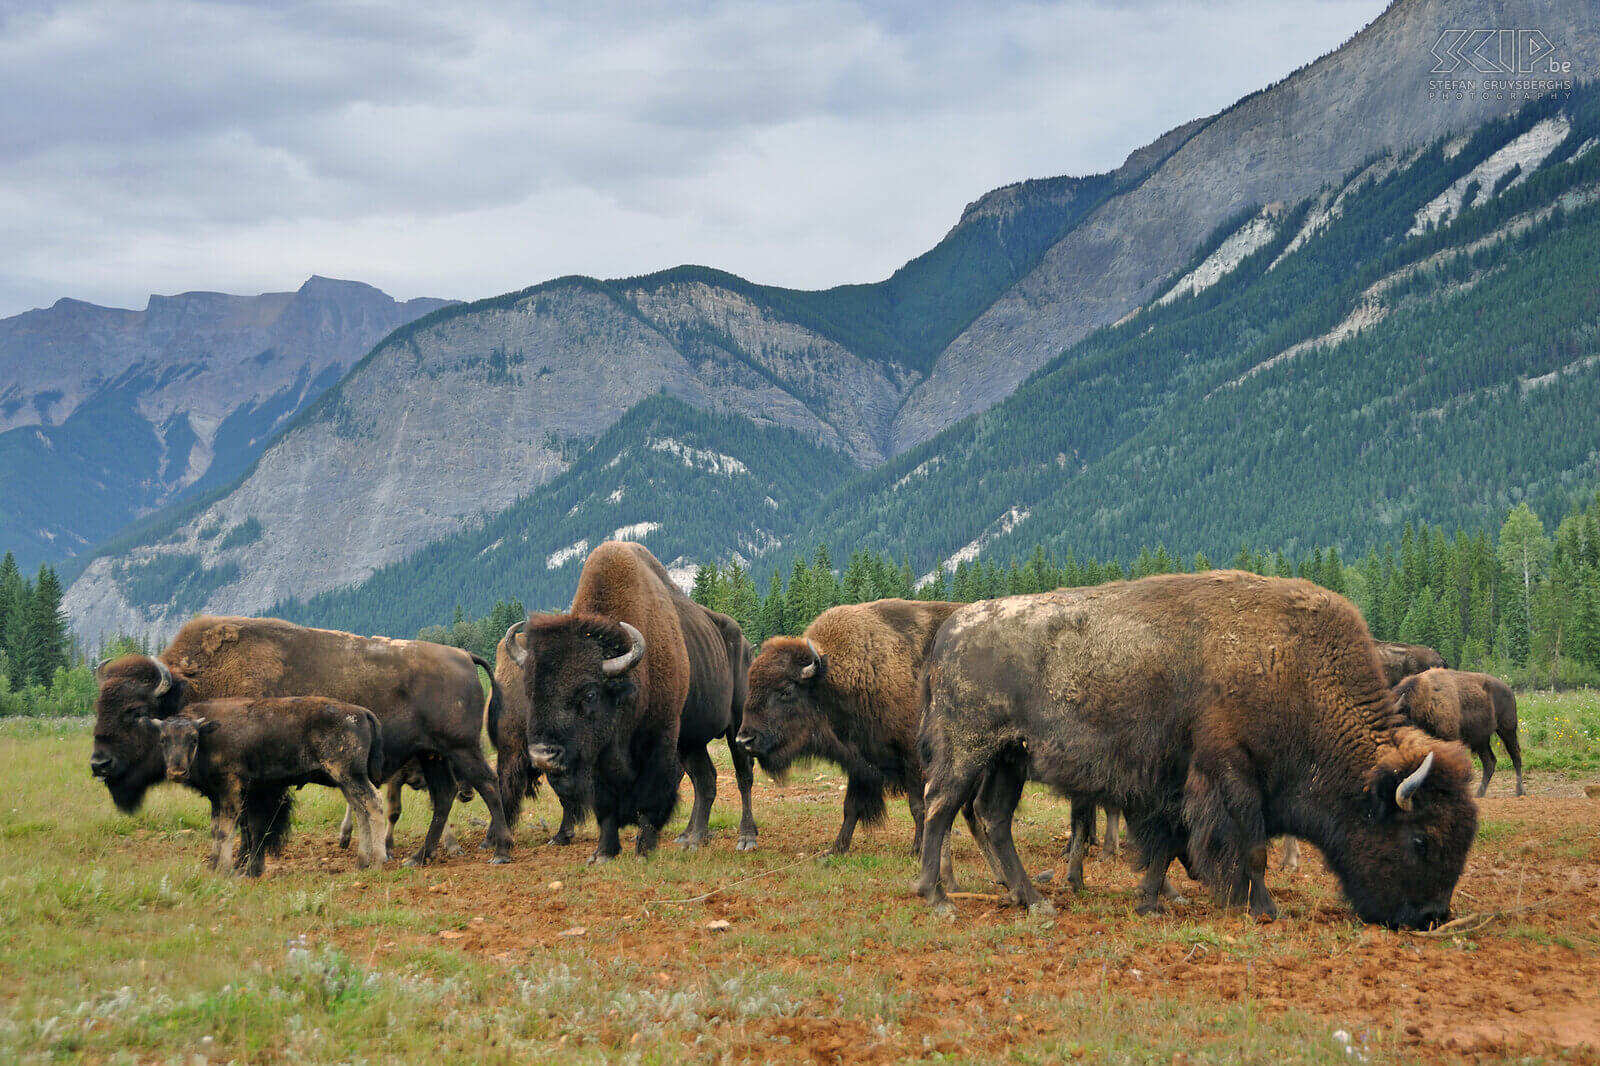 Golden - Bisons Bisons in the Rocky Mountain Buffalo Ranch in Blaeberry in Golden. Stefan Cruysberghs